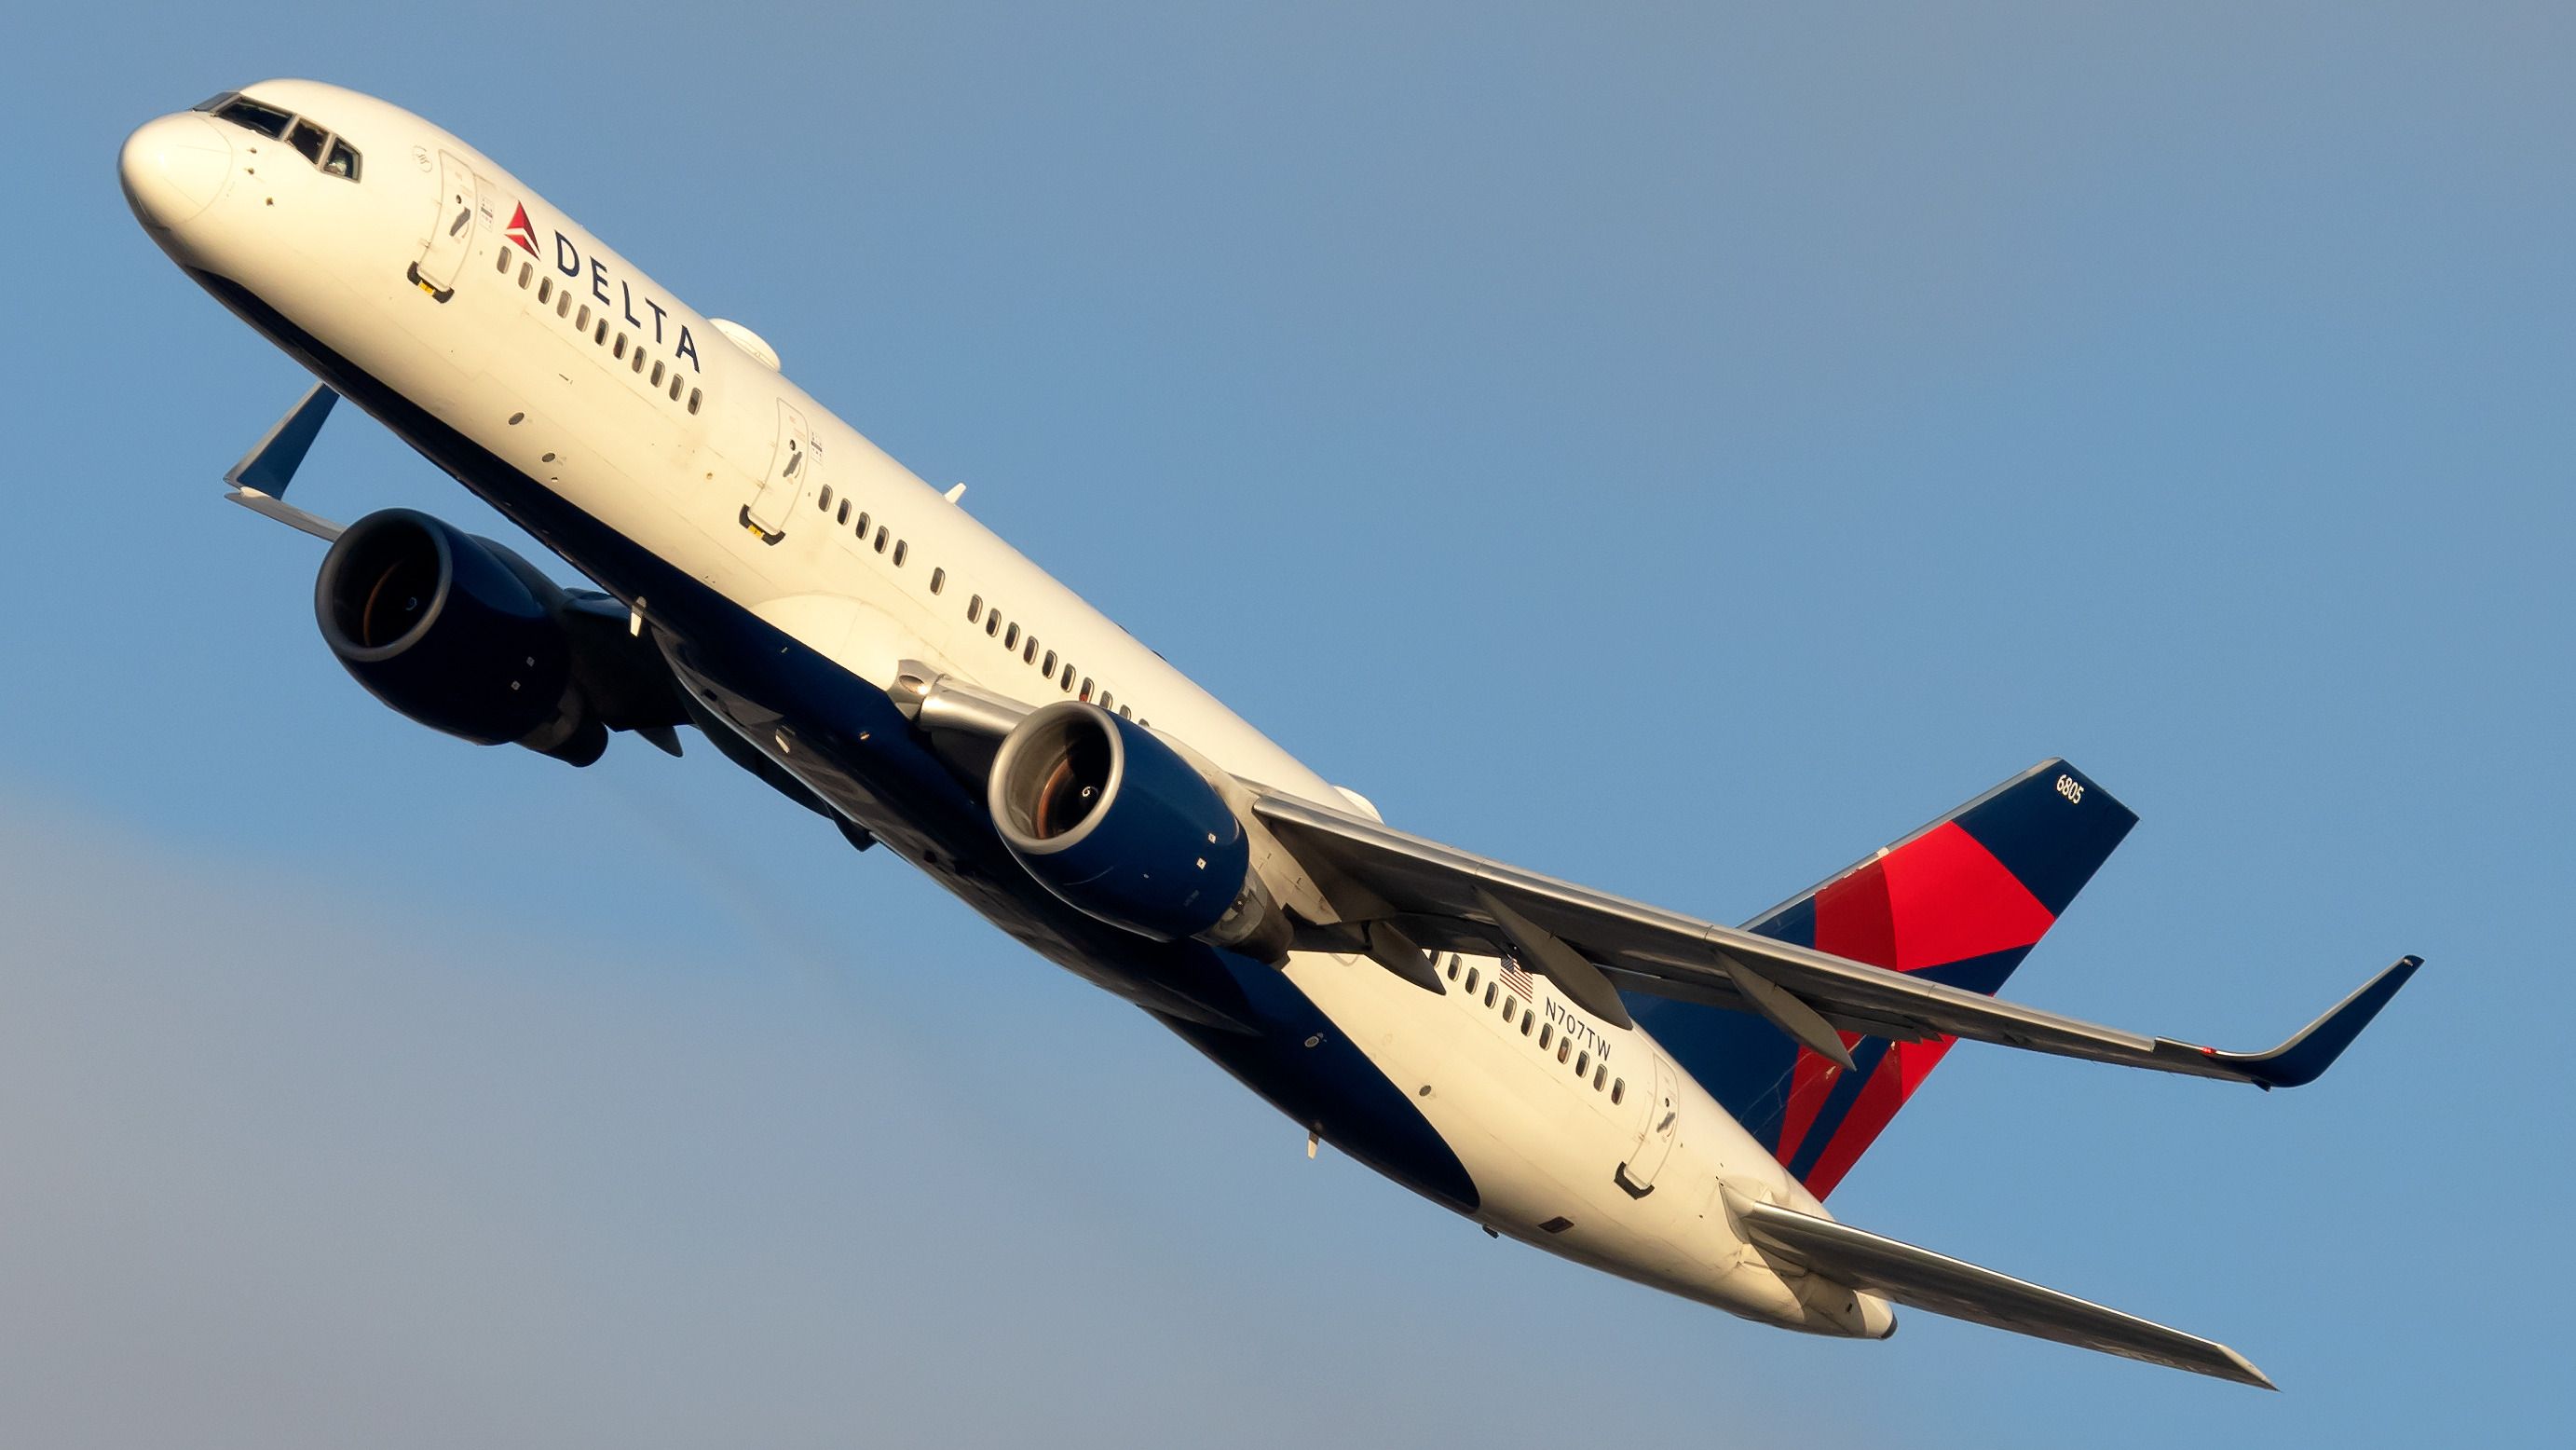 A Delta Air Lines Boeing 757-200 flying